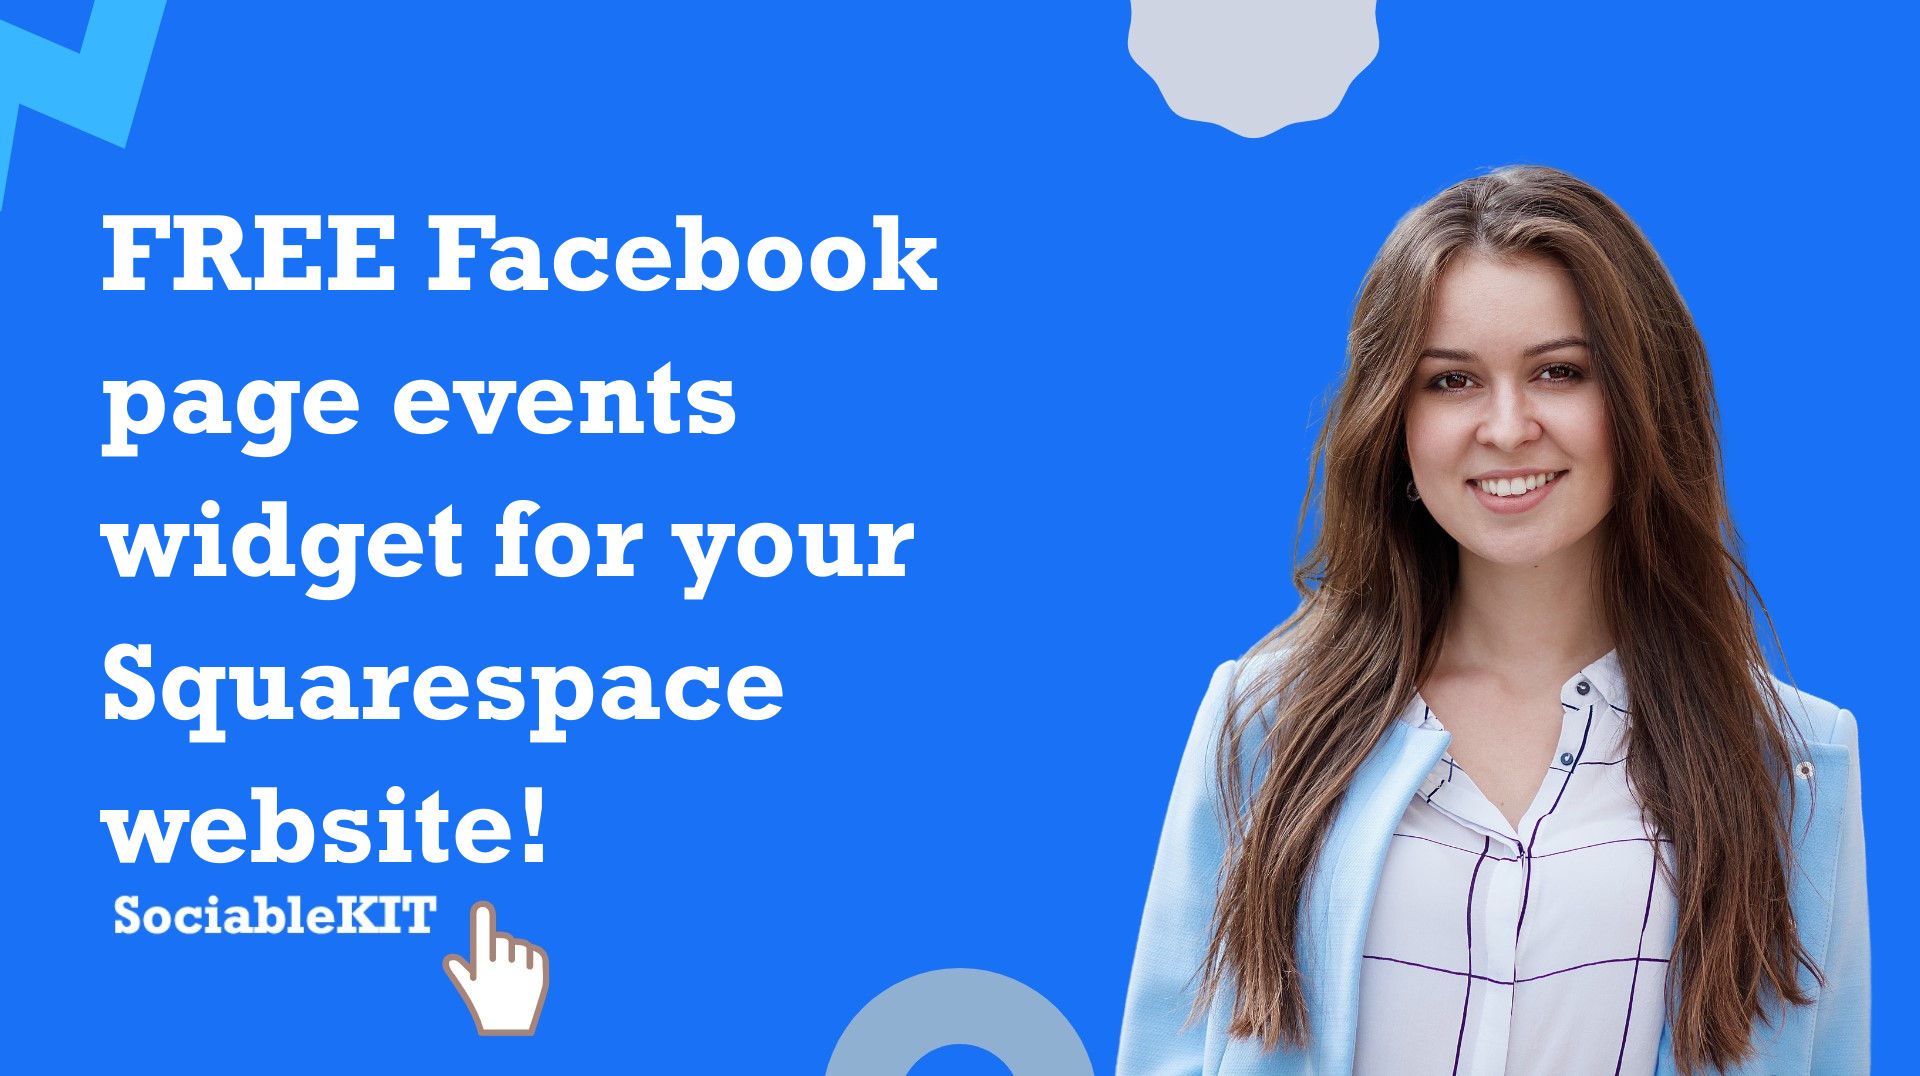 Free Facebook page events widget for your Squarespace website